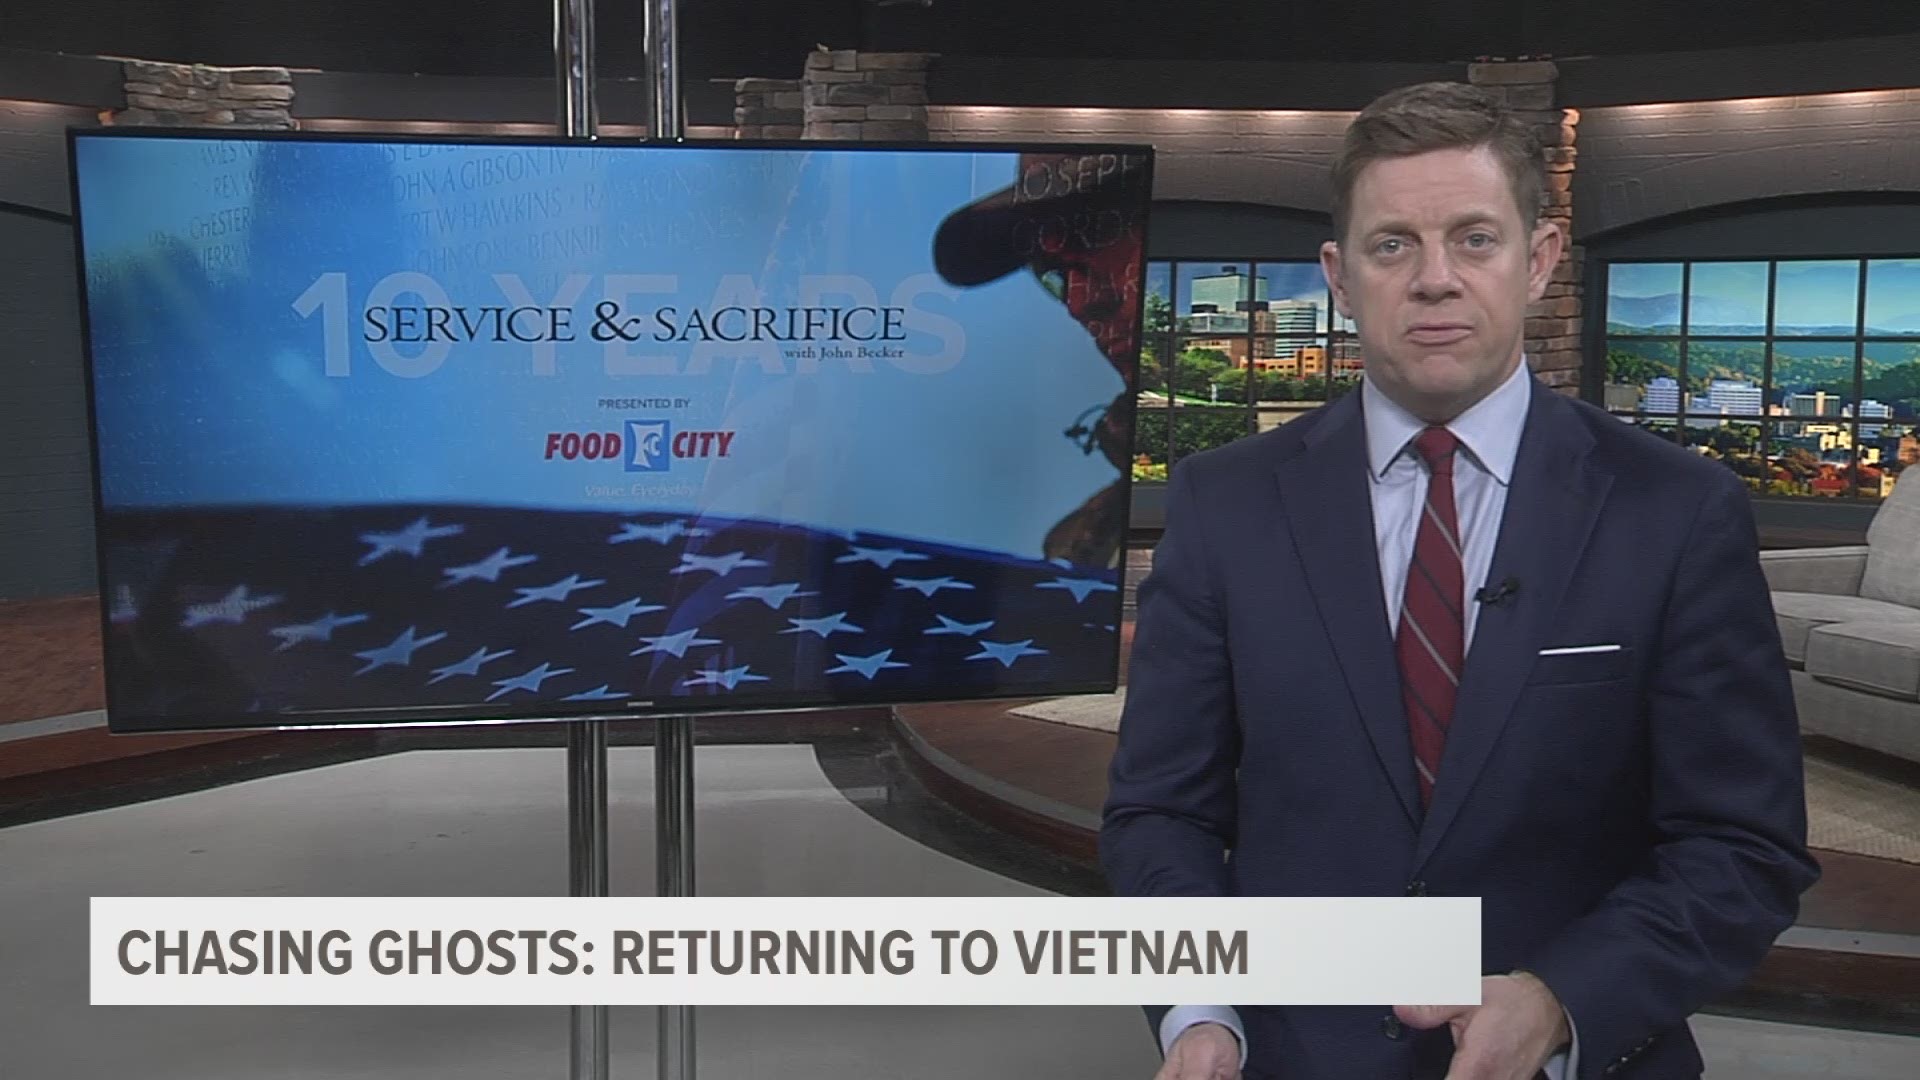 For one East Tennessee Marine named Gary Koontz, a trip back to Vietnam brought surprises and self-discovery. (Originally aired Feb. 15, 2018)